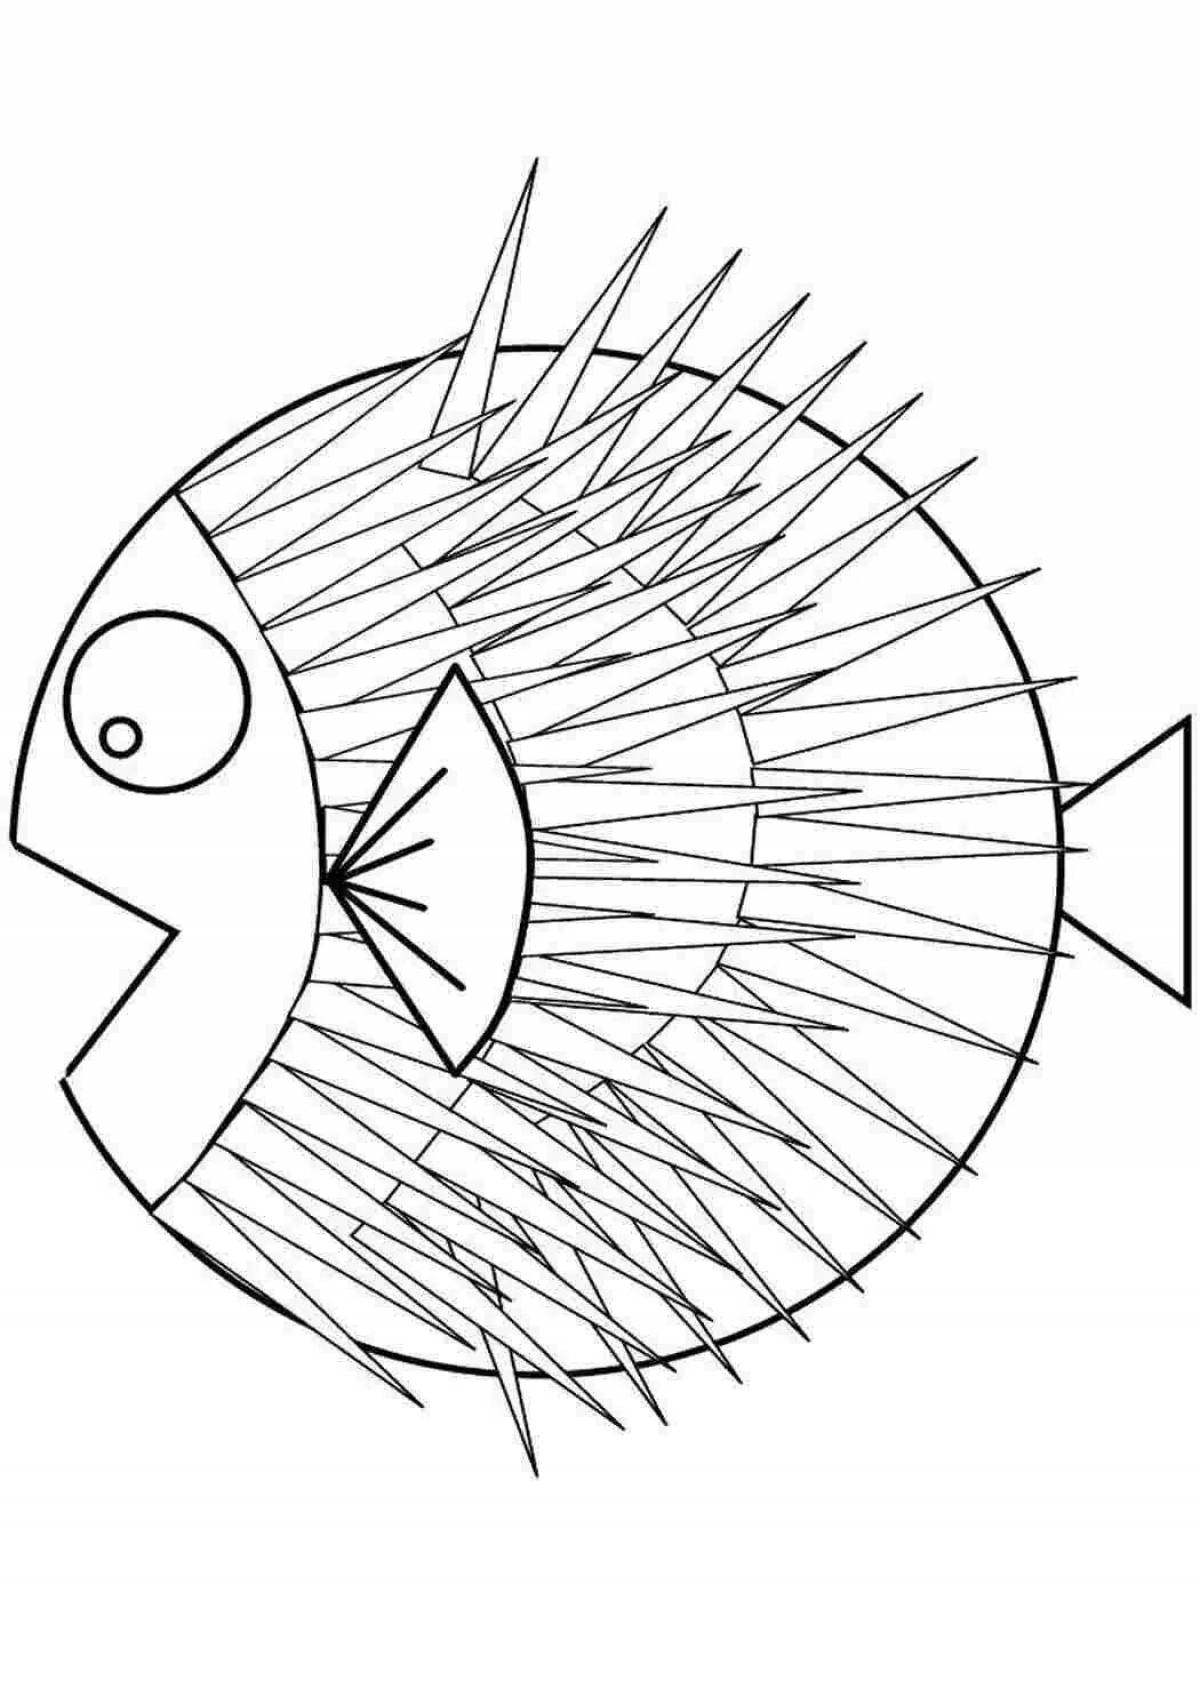 Adorable fish ball coloring page